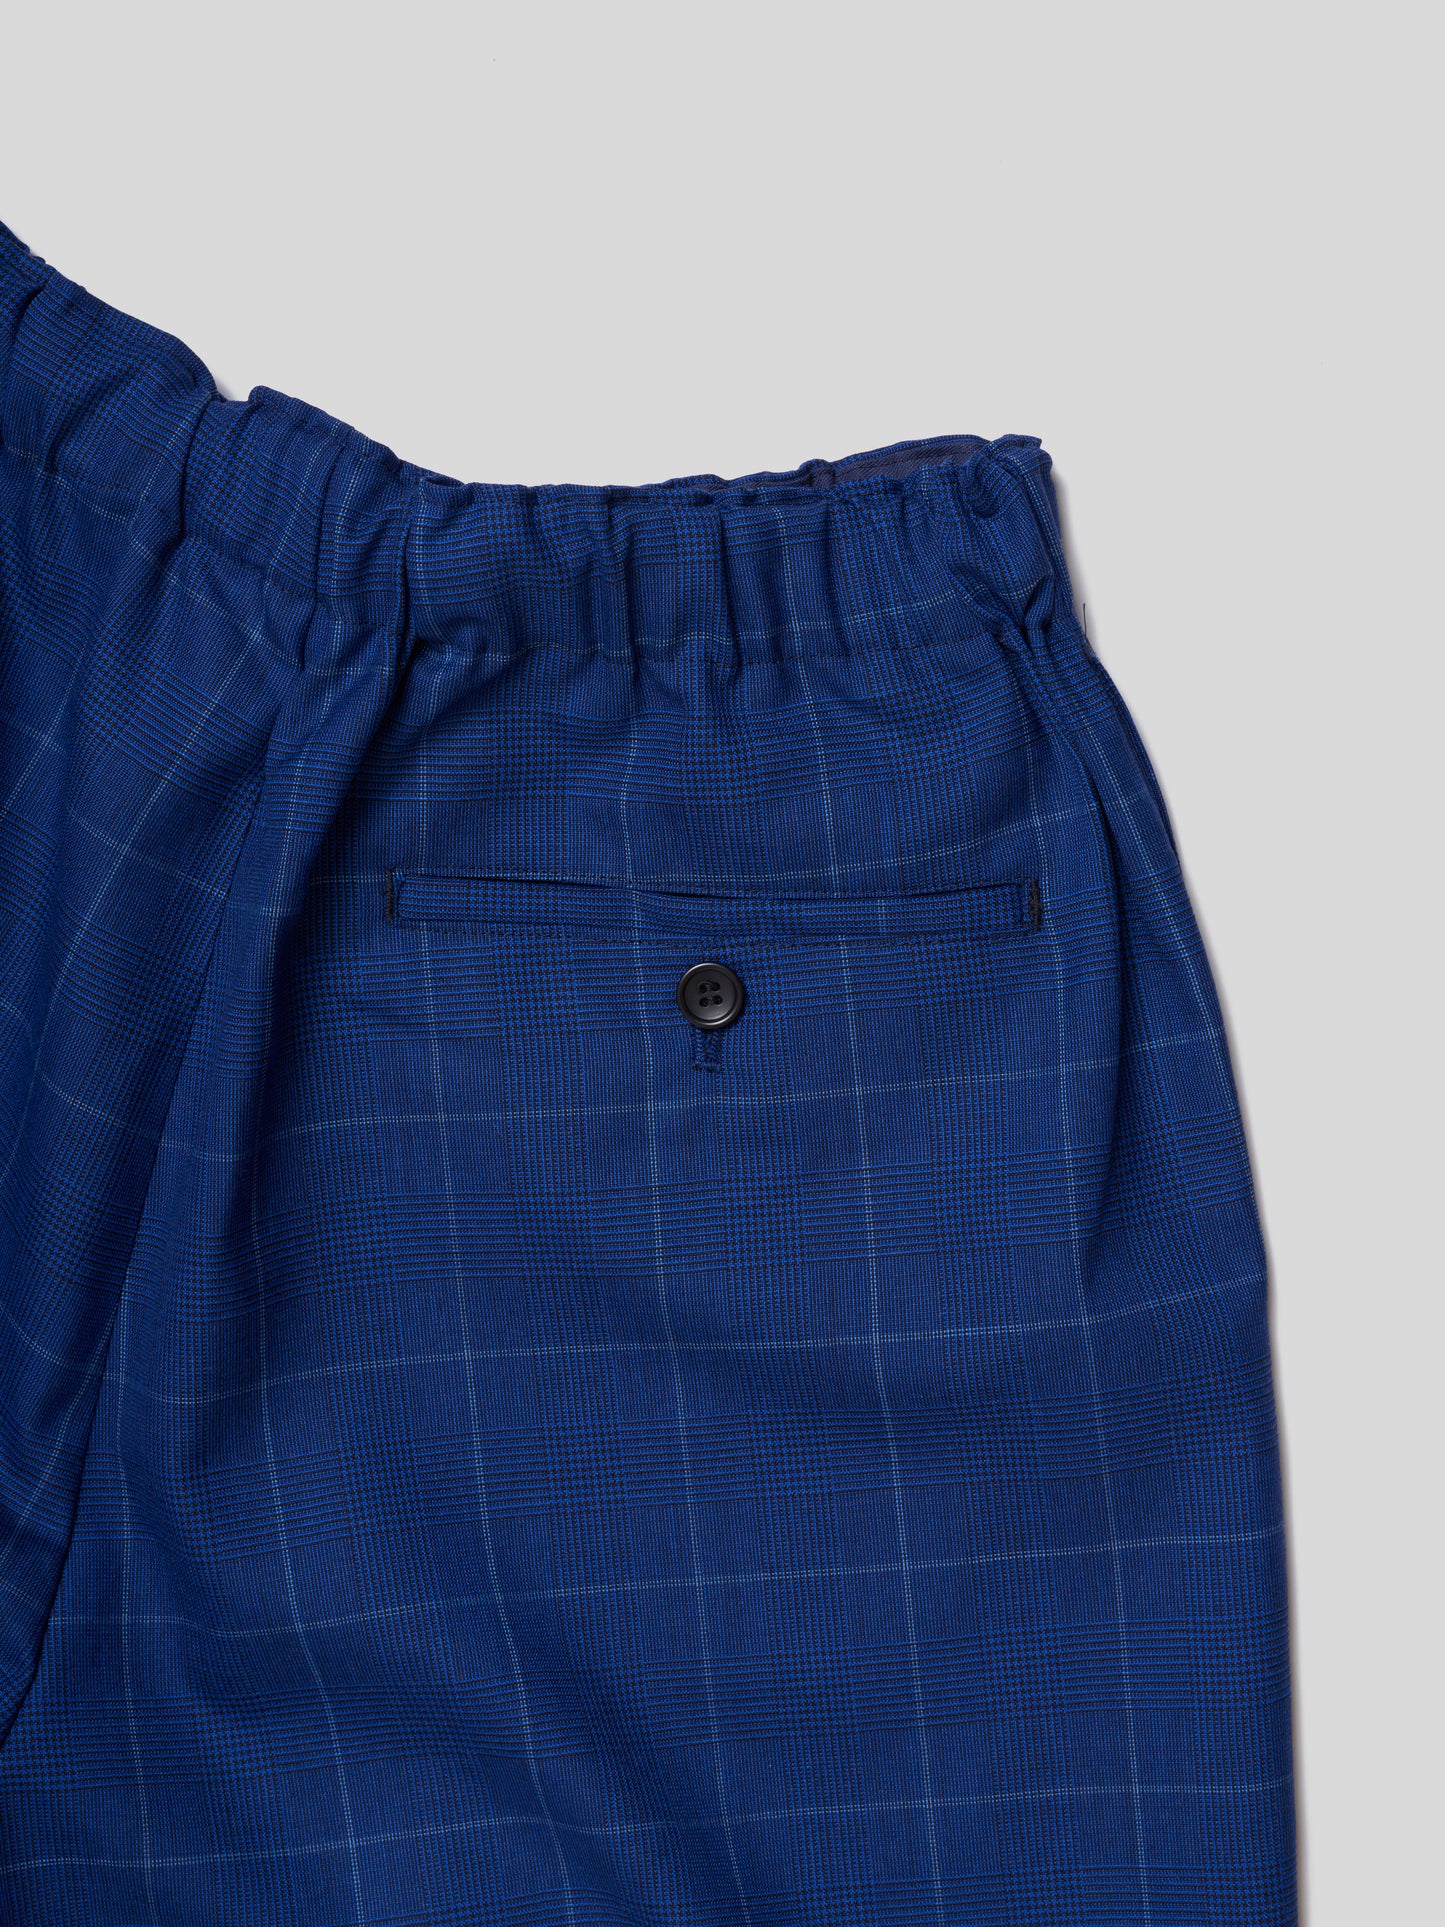 TRAINER SHORTS/ BLUE CHECK